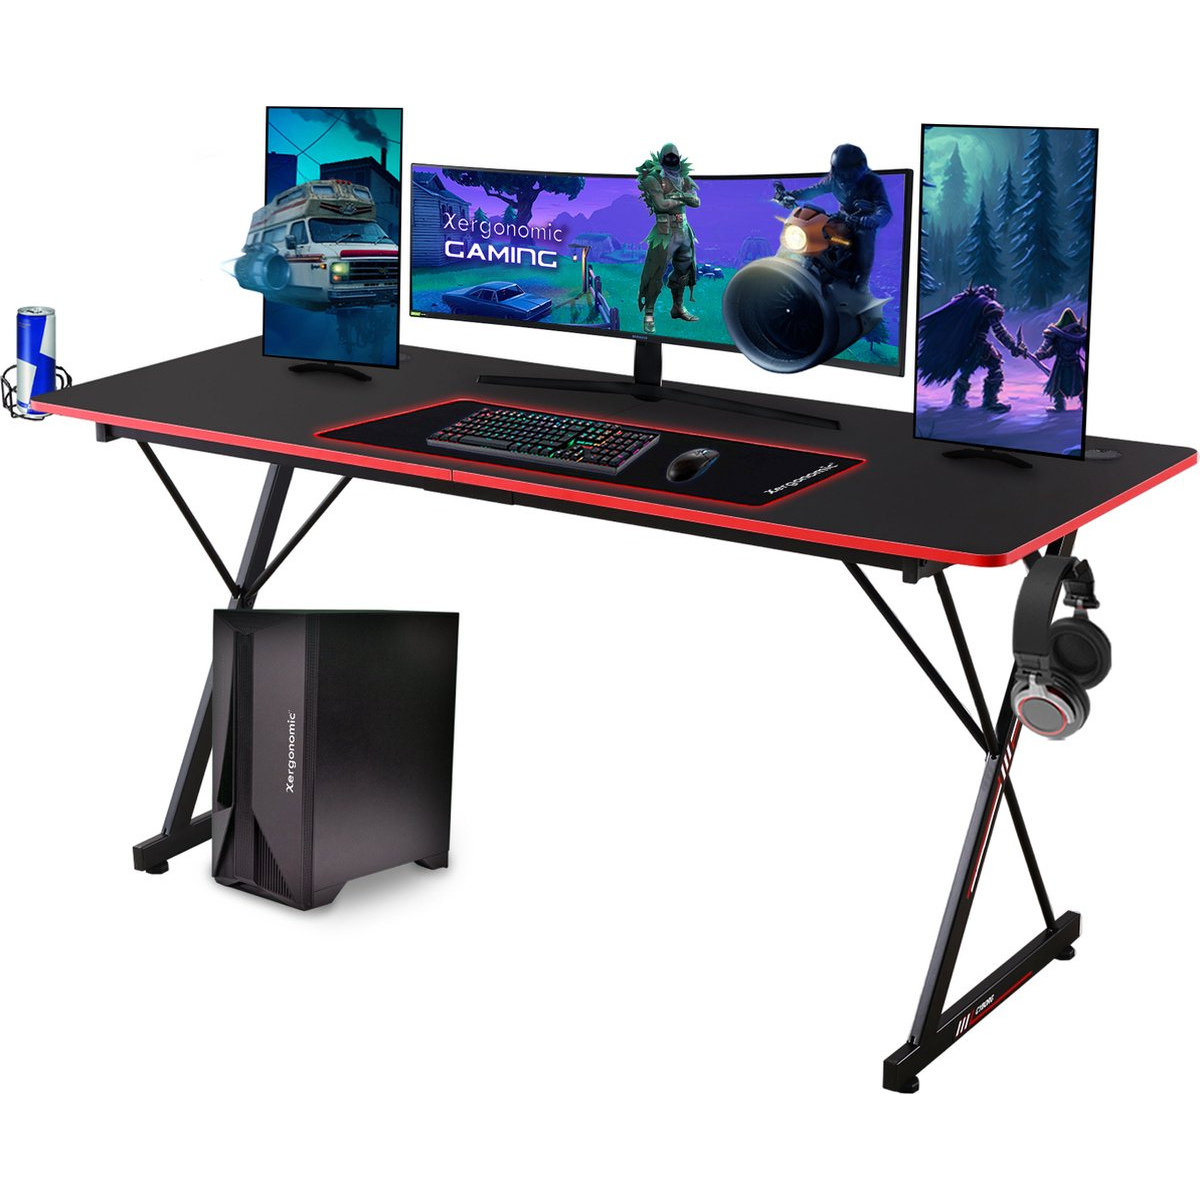 Xergonomic Aion Cyborg Gaming desk - Headphone holder, cup holder & Cable organizer - Carbon Fiber Coated Top Layer - Adjustable legs - D60xW160xH75 cm - Black/Red